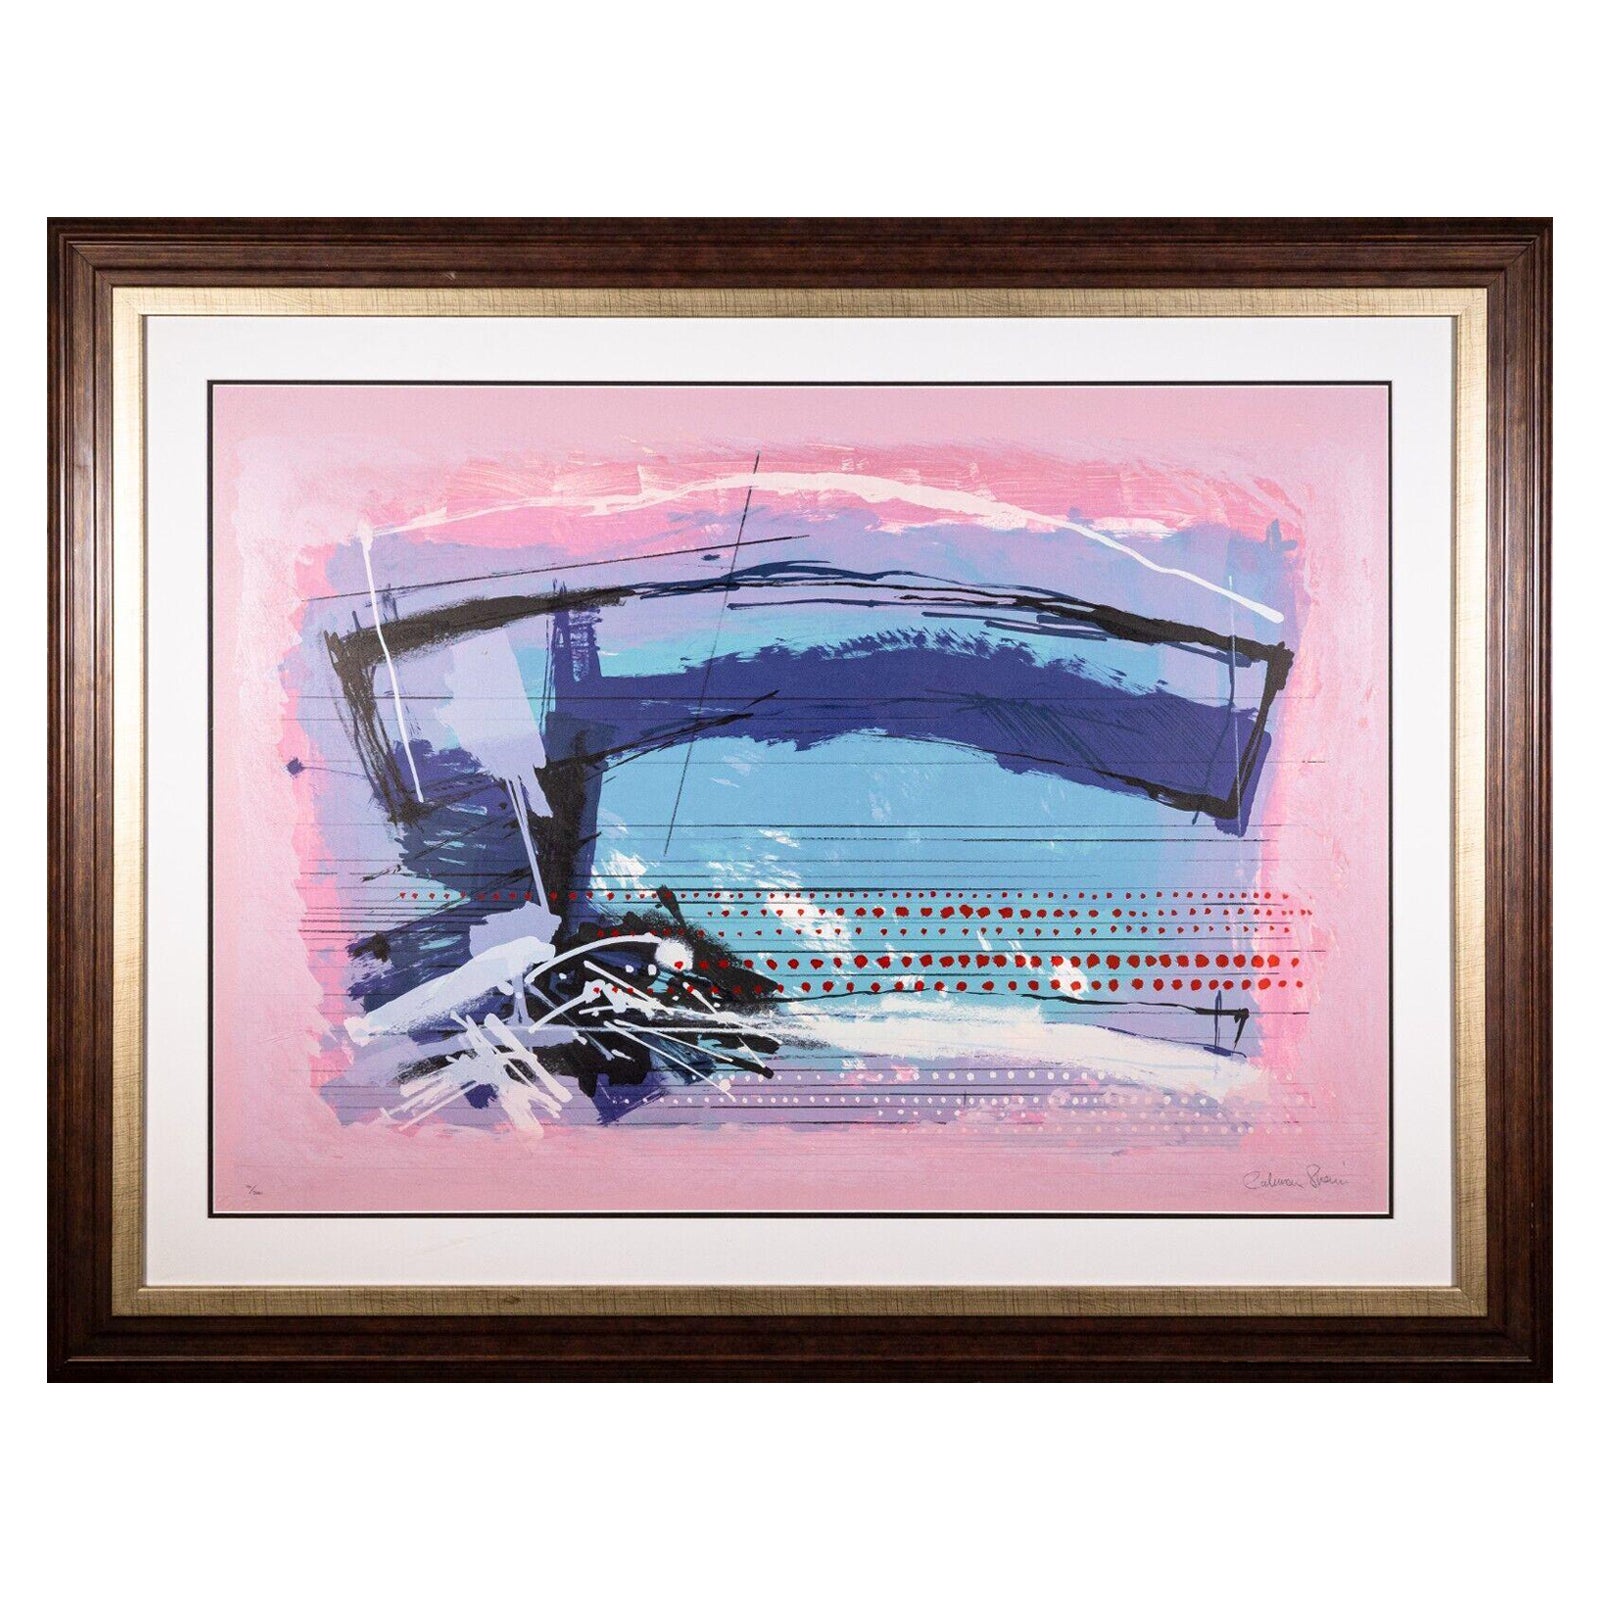 Calman Shemi Manuscript 1989 Abstract Modern Signed Lithograph 90/300 Framed For Sale